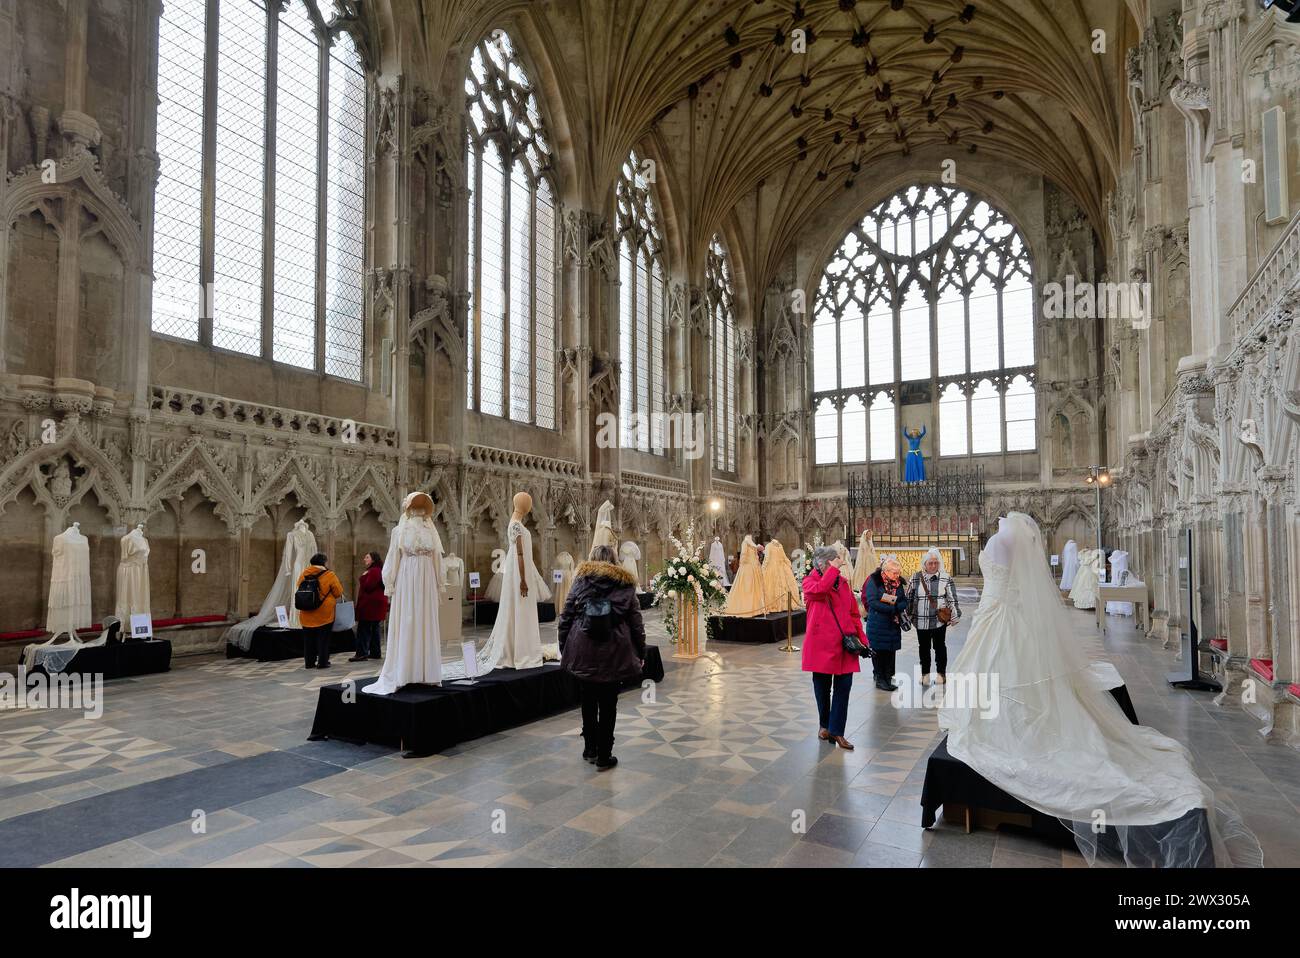 A celebration of Bridal gowns held in the Lady Chapel of Ely cathedral Cambridgeshire England Great Britain UK Stock Photo